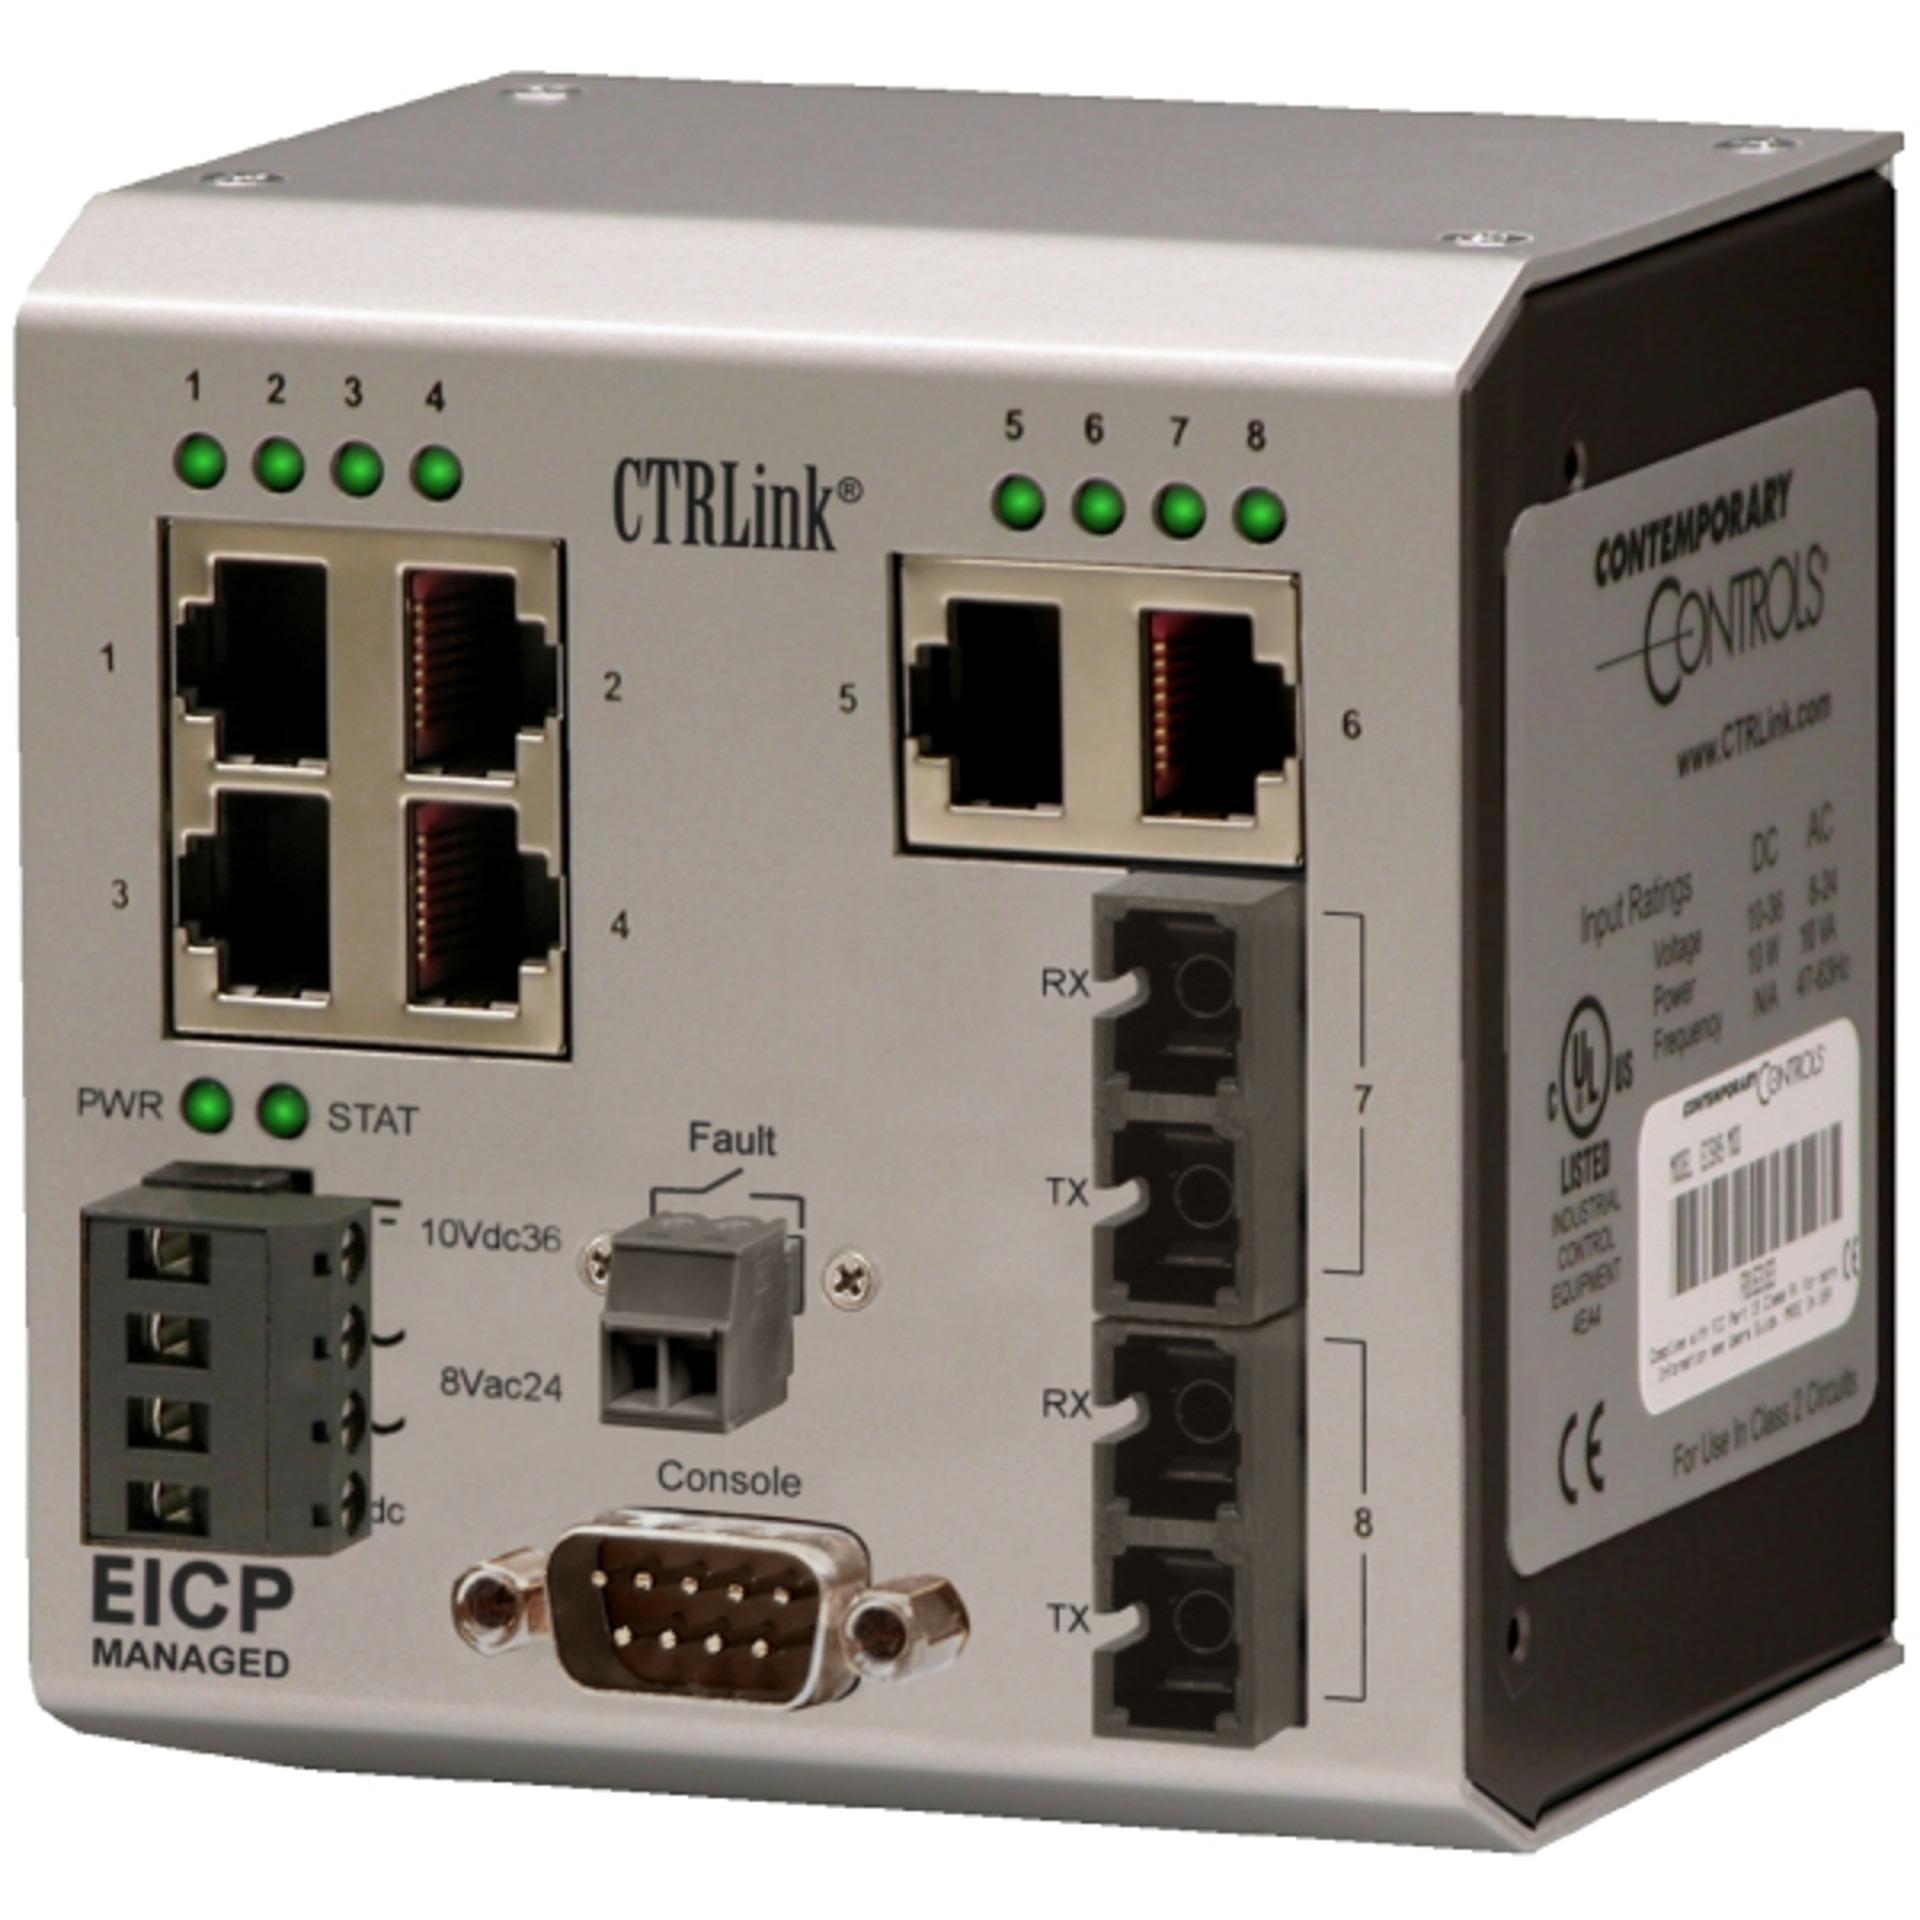 eicp8m-100t-fc-contemporary-controls-unmanaged-switch-b23v5